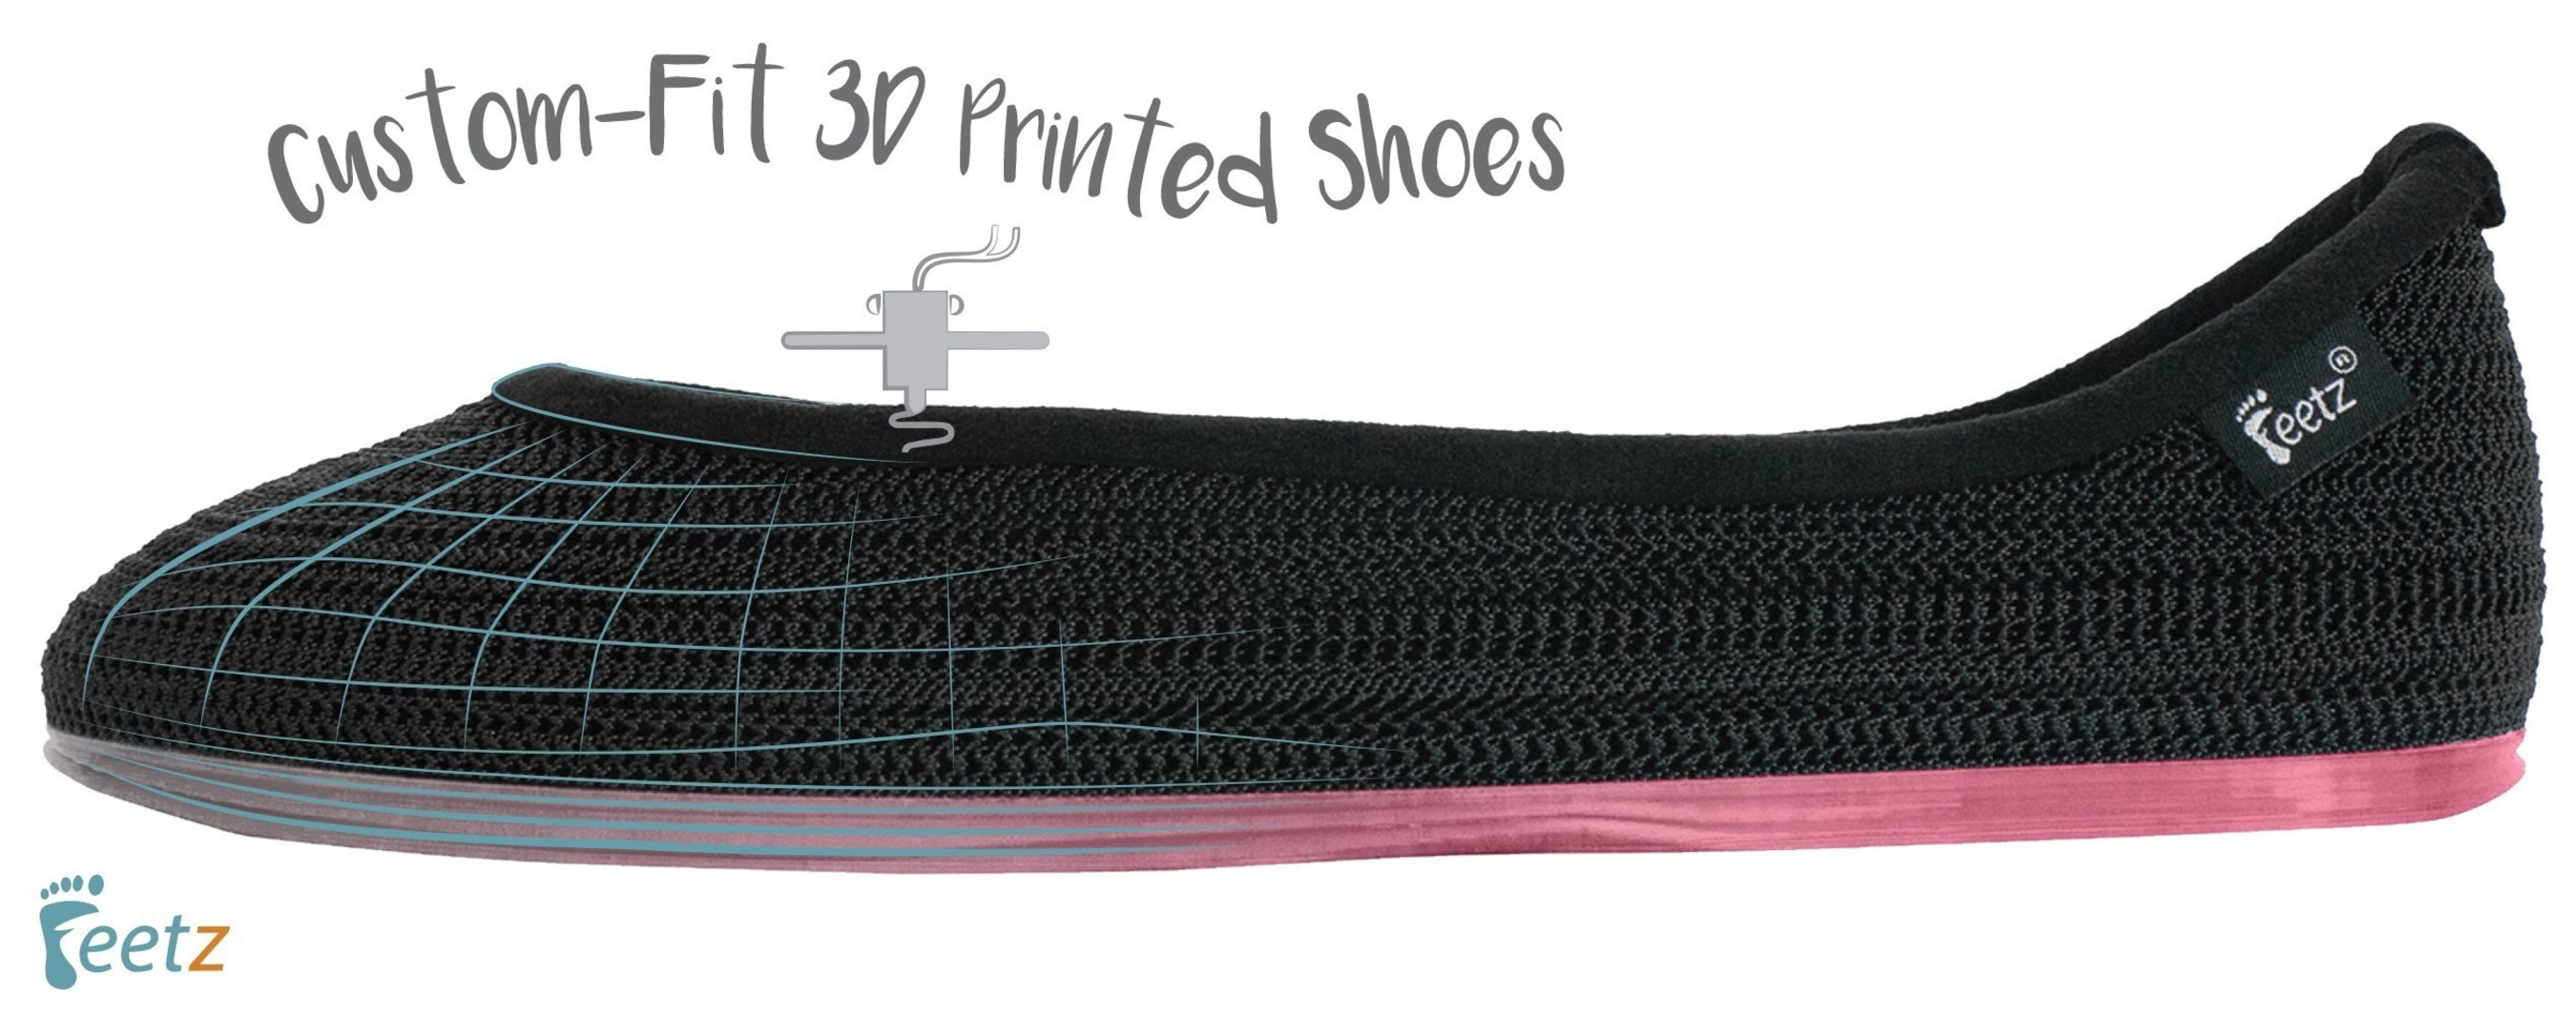 Feetz custom-fit, sustainably made 3D printed shoes.